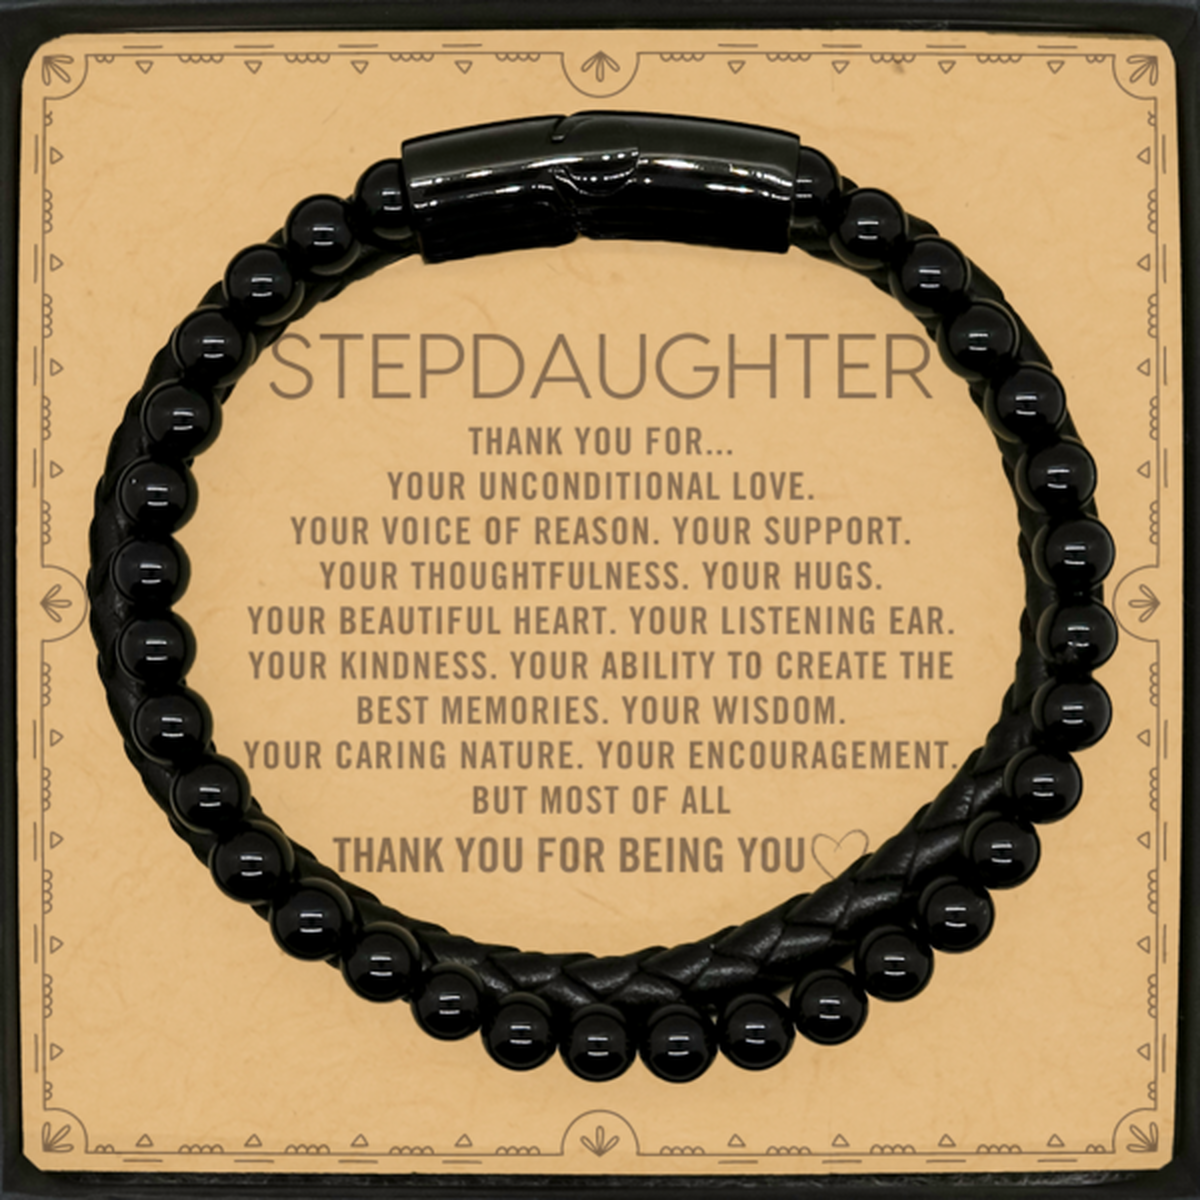 Stepdaughter Stone Leather Bracelets Custom, Message Card Gifts For Stepdaughter Christmas Graduation Birthday Gifts for Men Women Stepdaughter Thank you for Your unconditional love